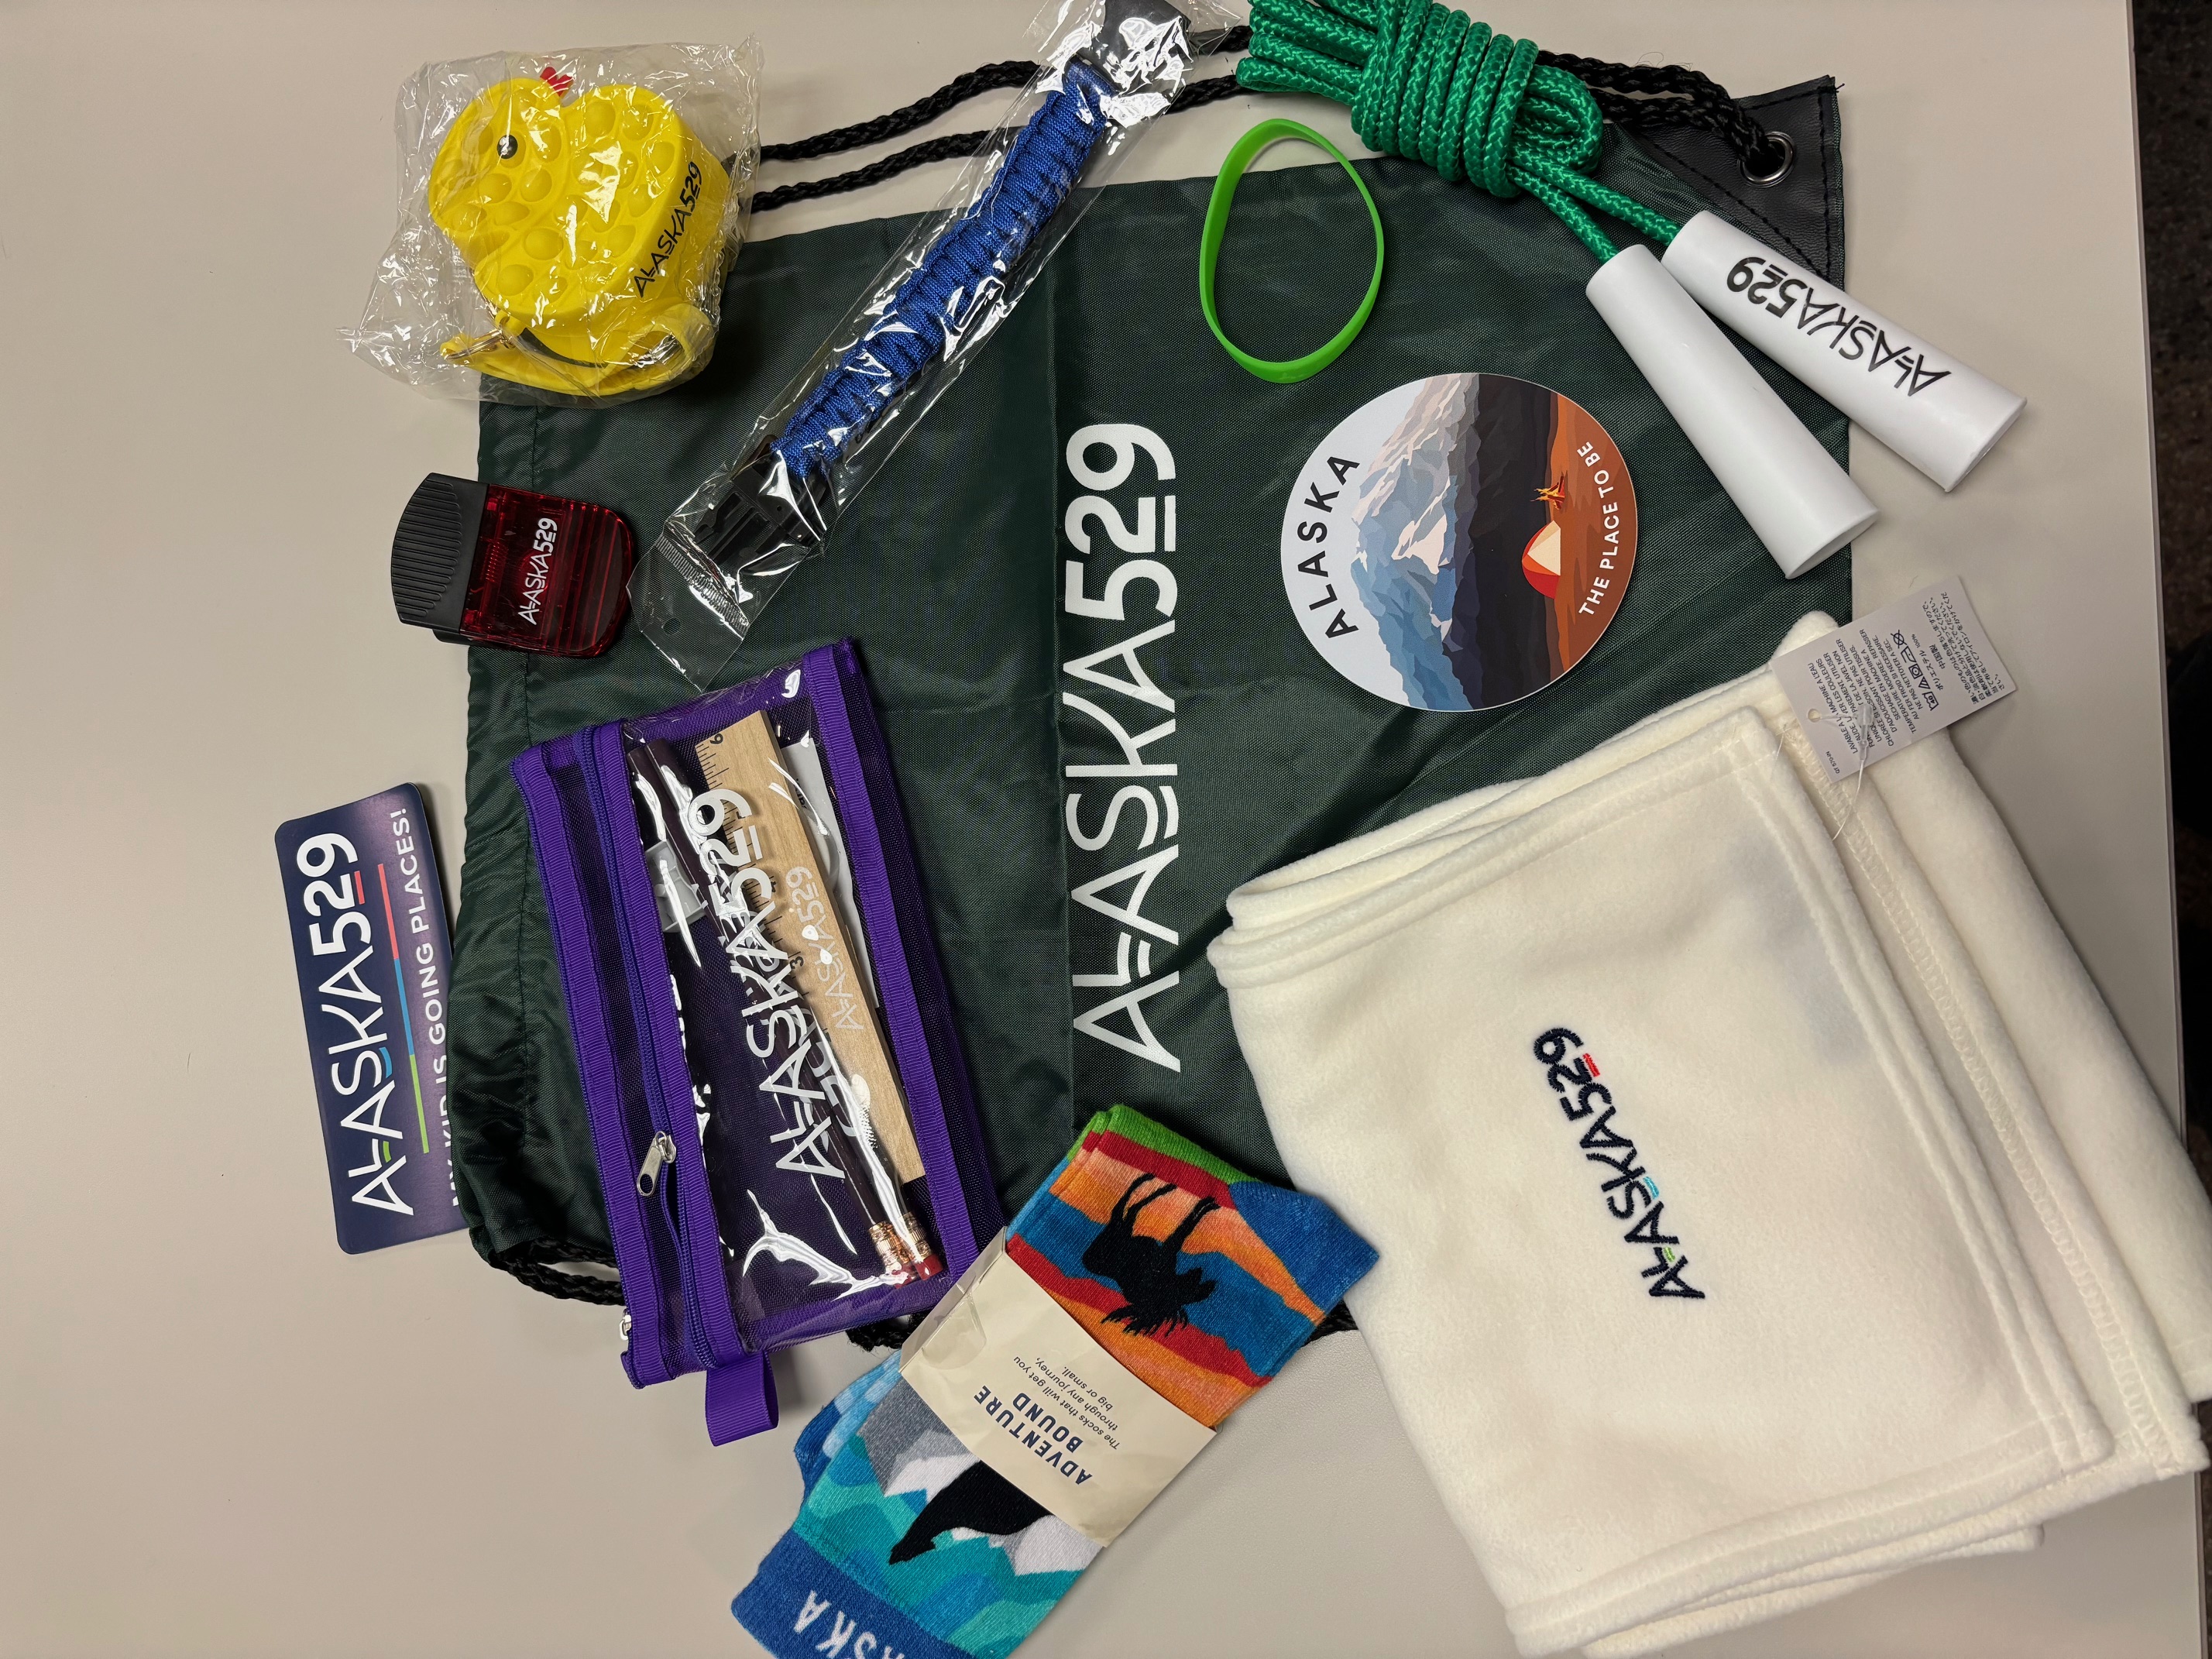 Grab bag items with Alaska 529 logo including stickers, a jump rope, pencil case, rubber duckie and scarf